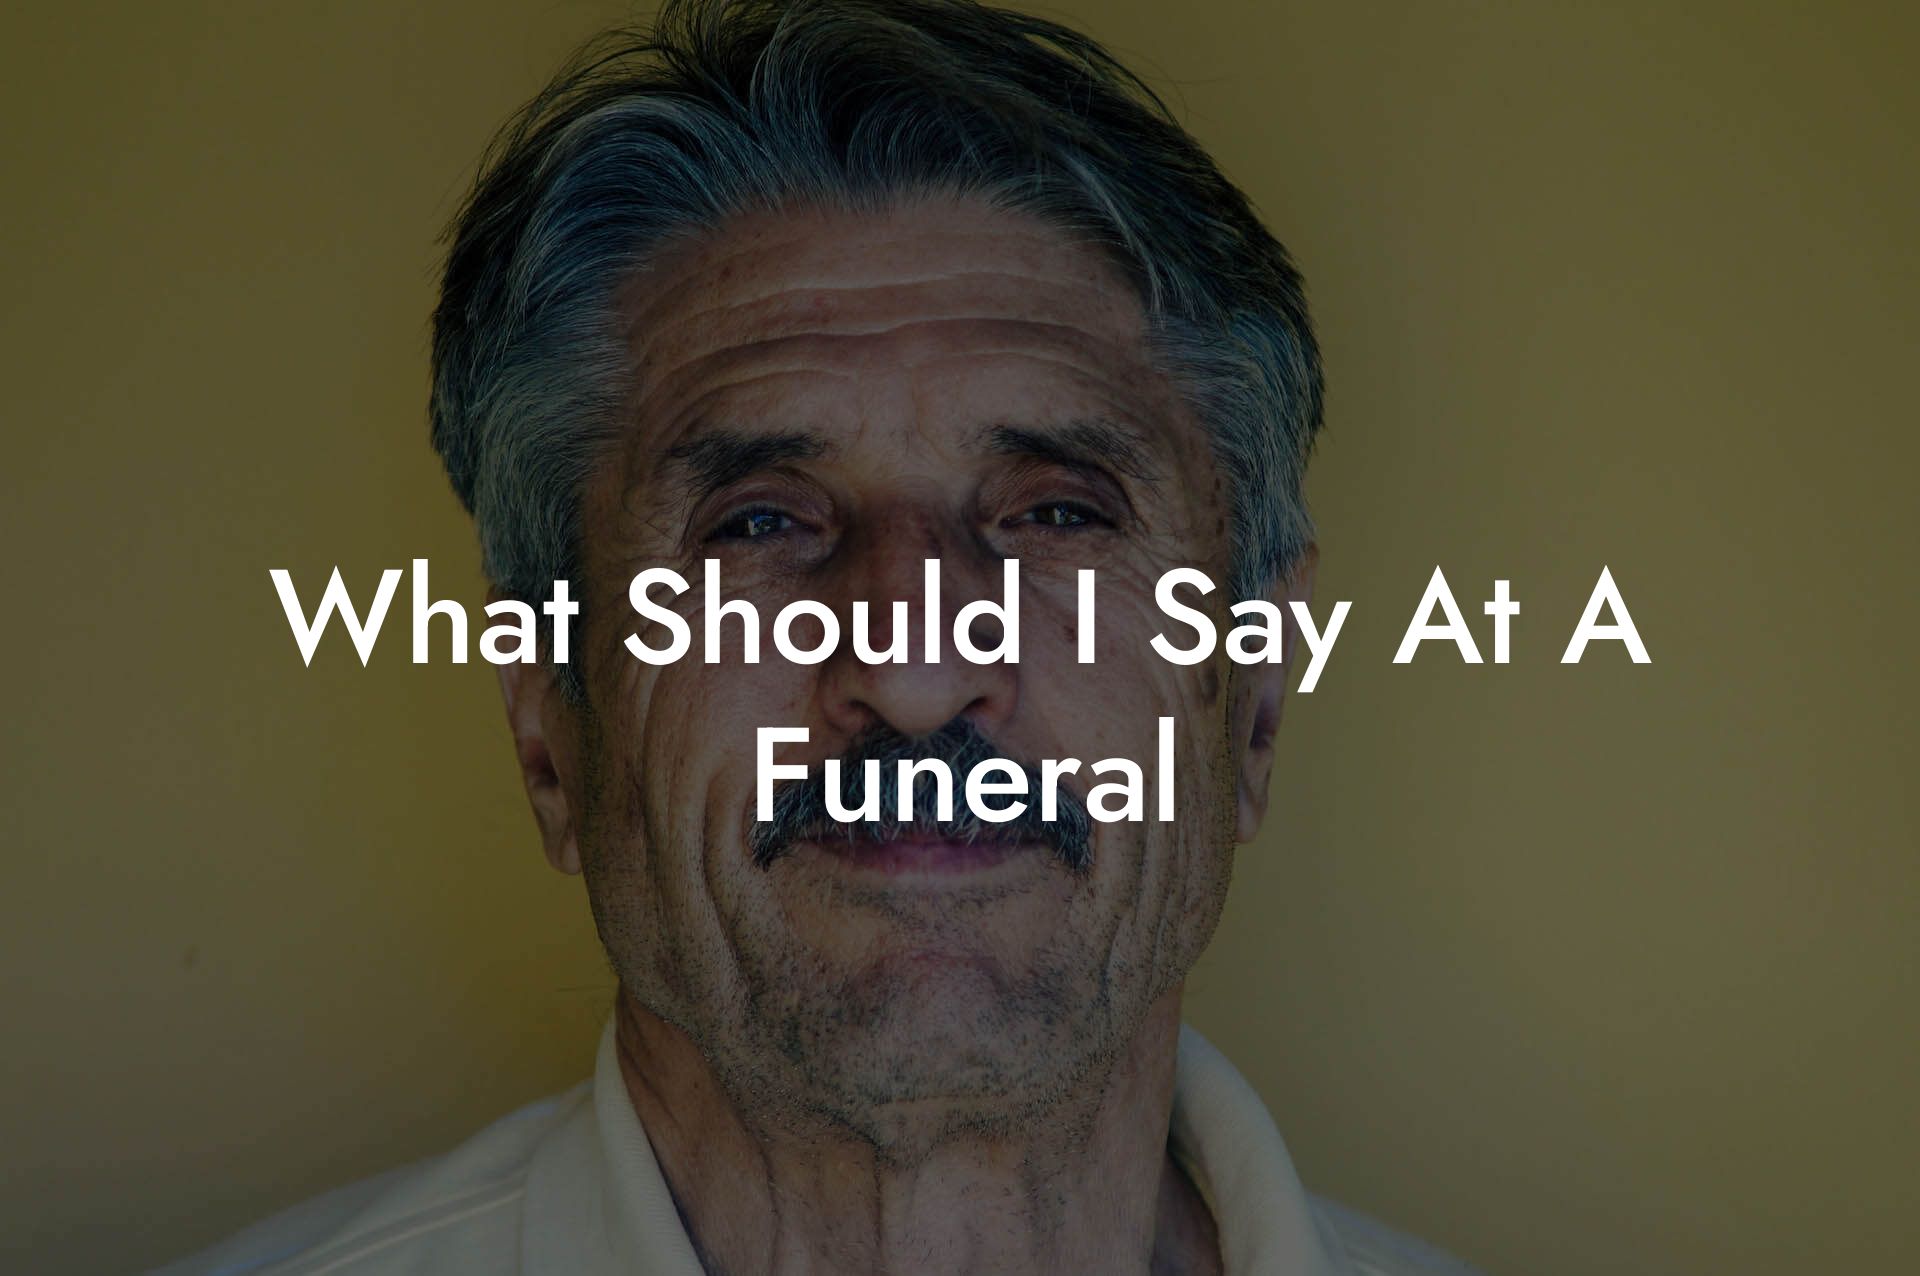 What Should I Say At A Funeral